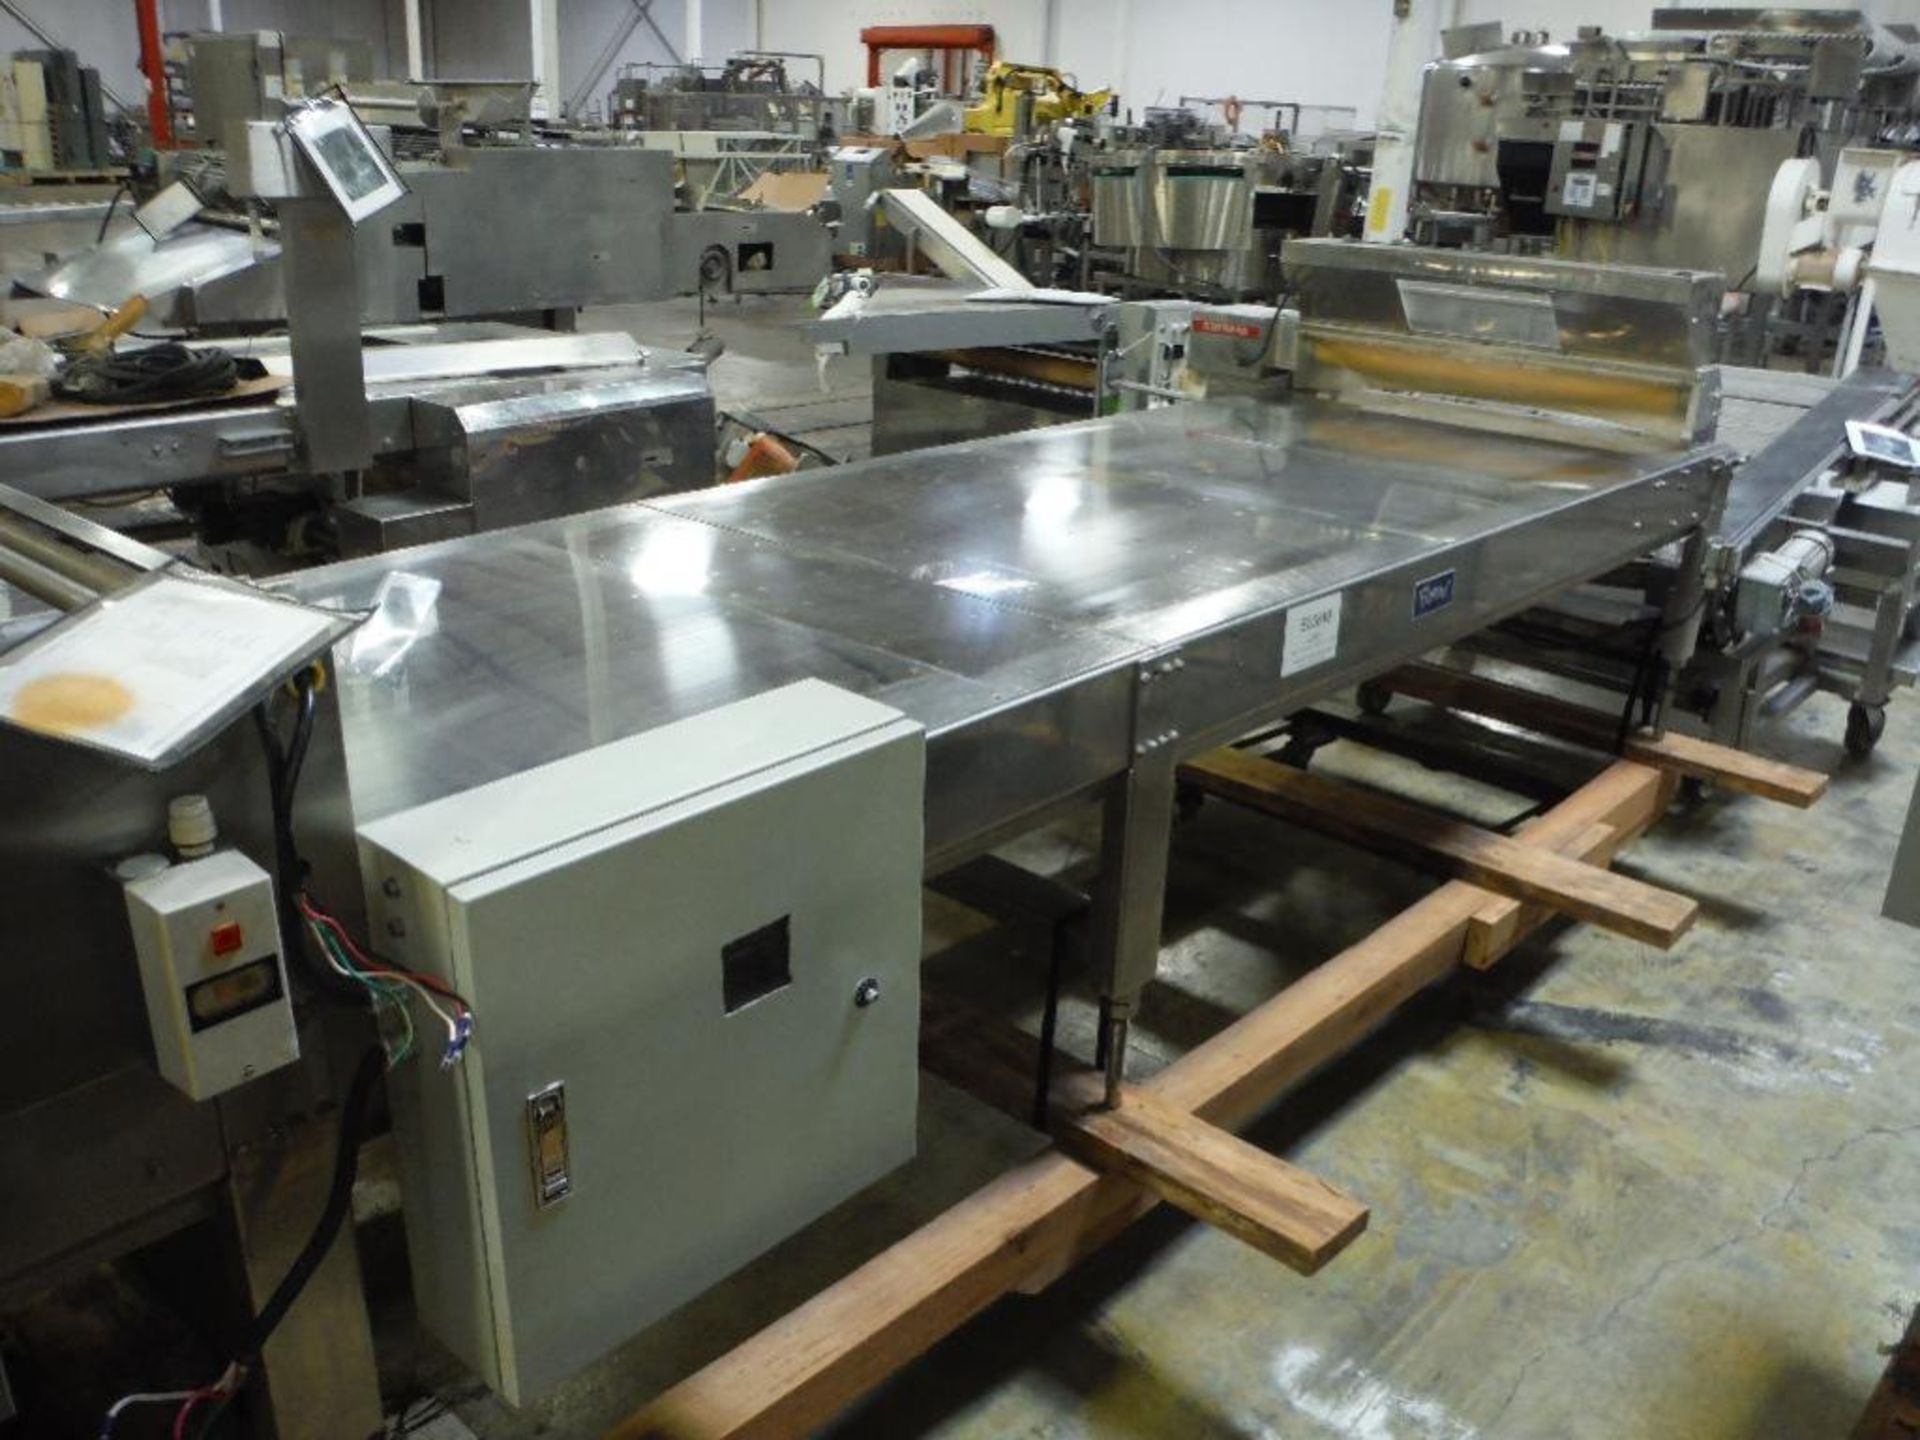 1991 Rheon sheeting conveyor, Model PC213, SN 00011, 180 in. long x 42 in. wide, with 1991 Rheon dou - Image 14 of 16